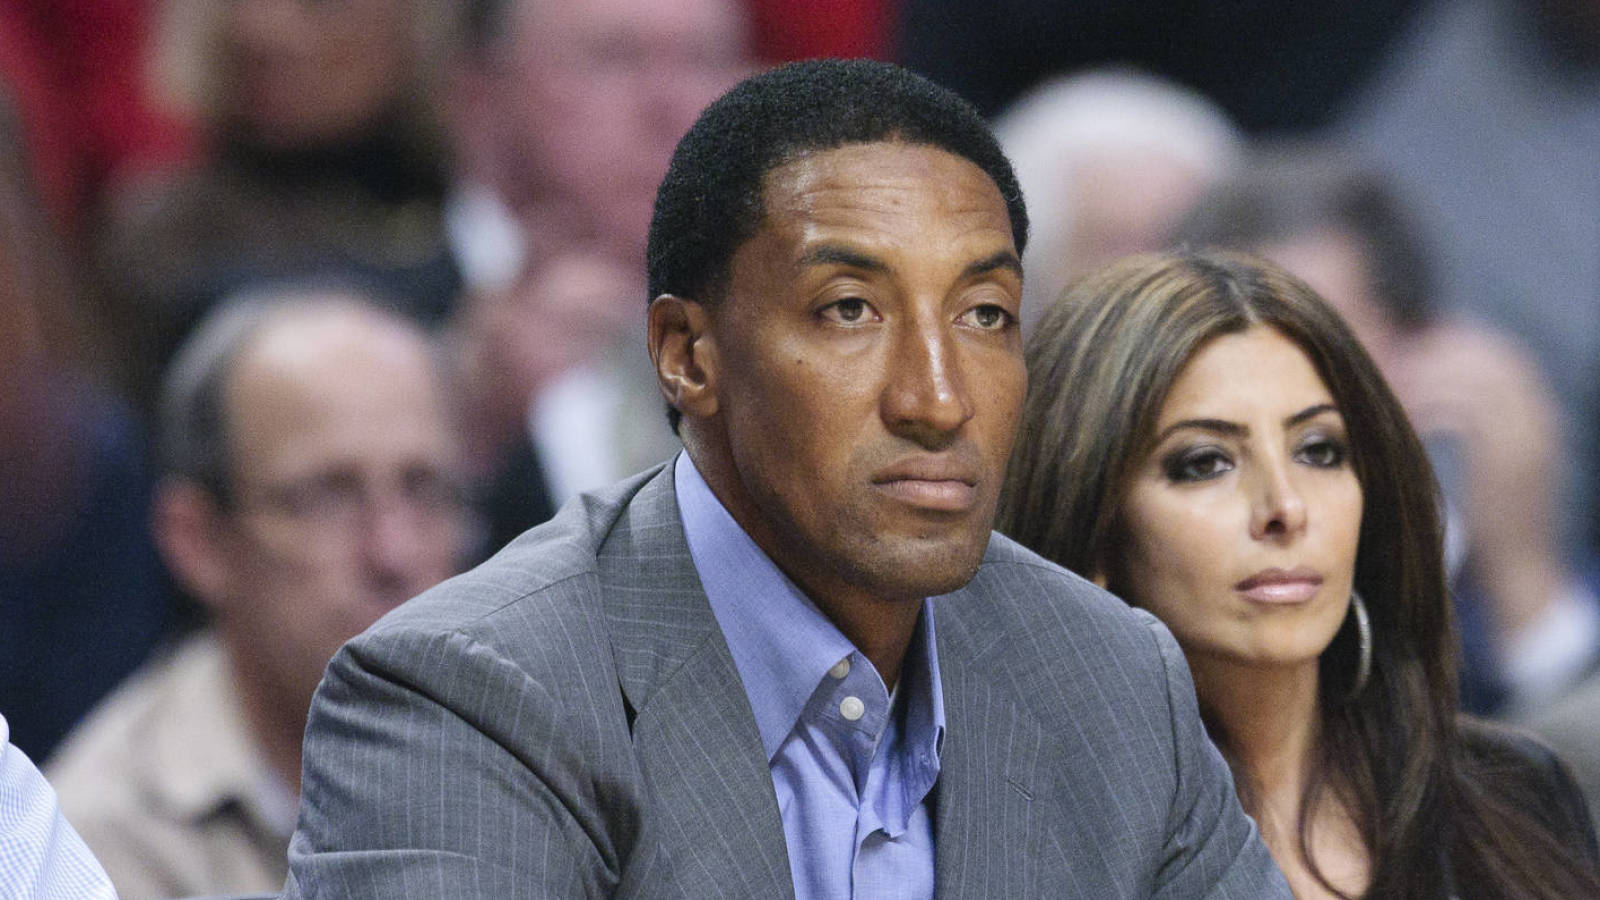 Scottie Pippen Takes Aim at Michael Jordan in New Book - The New York Times